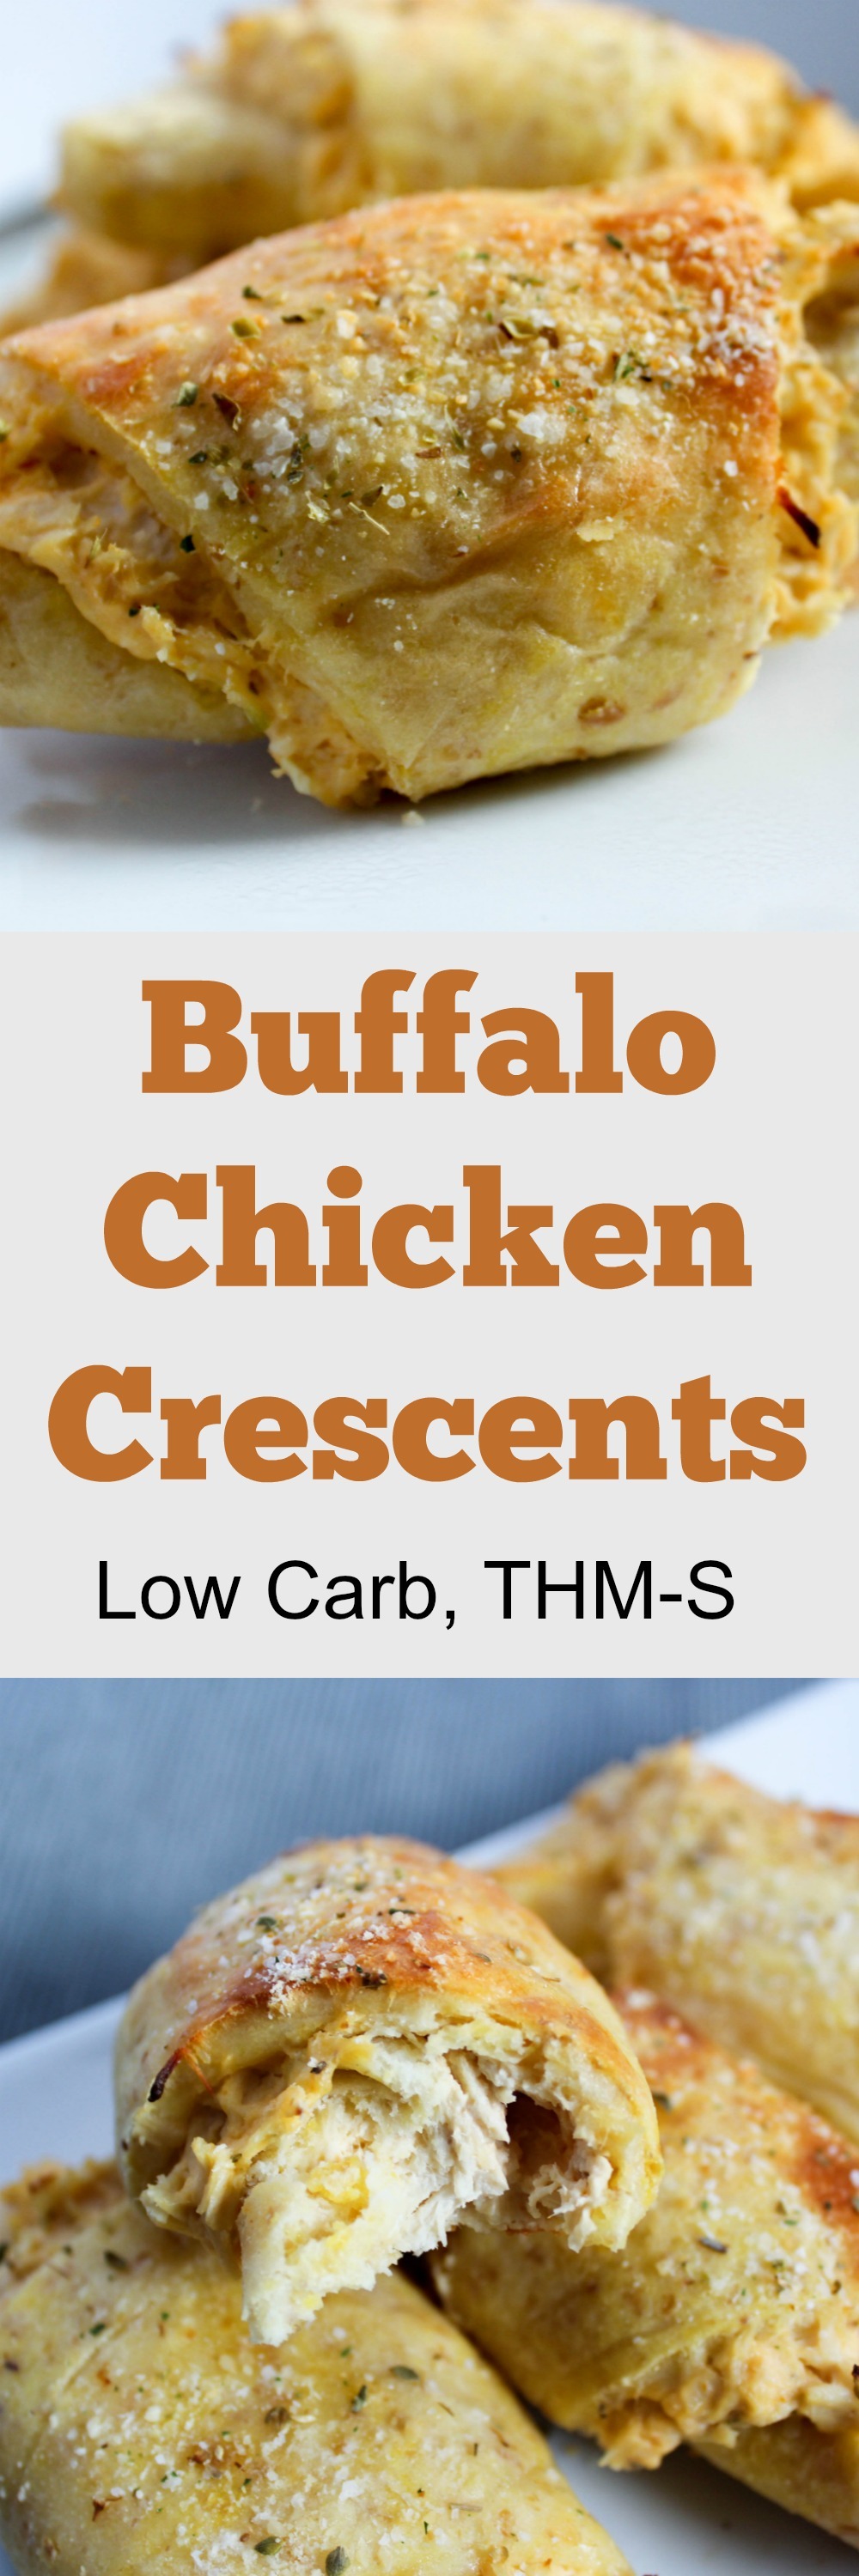 Buffalo Chicken Crescents (Low Carb, THM-S)